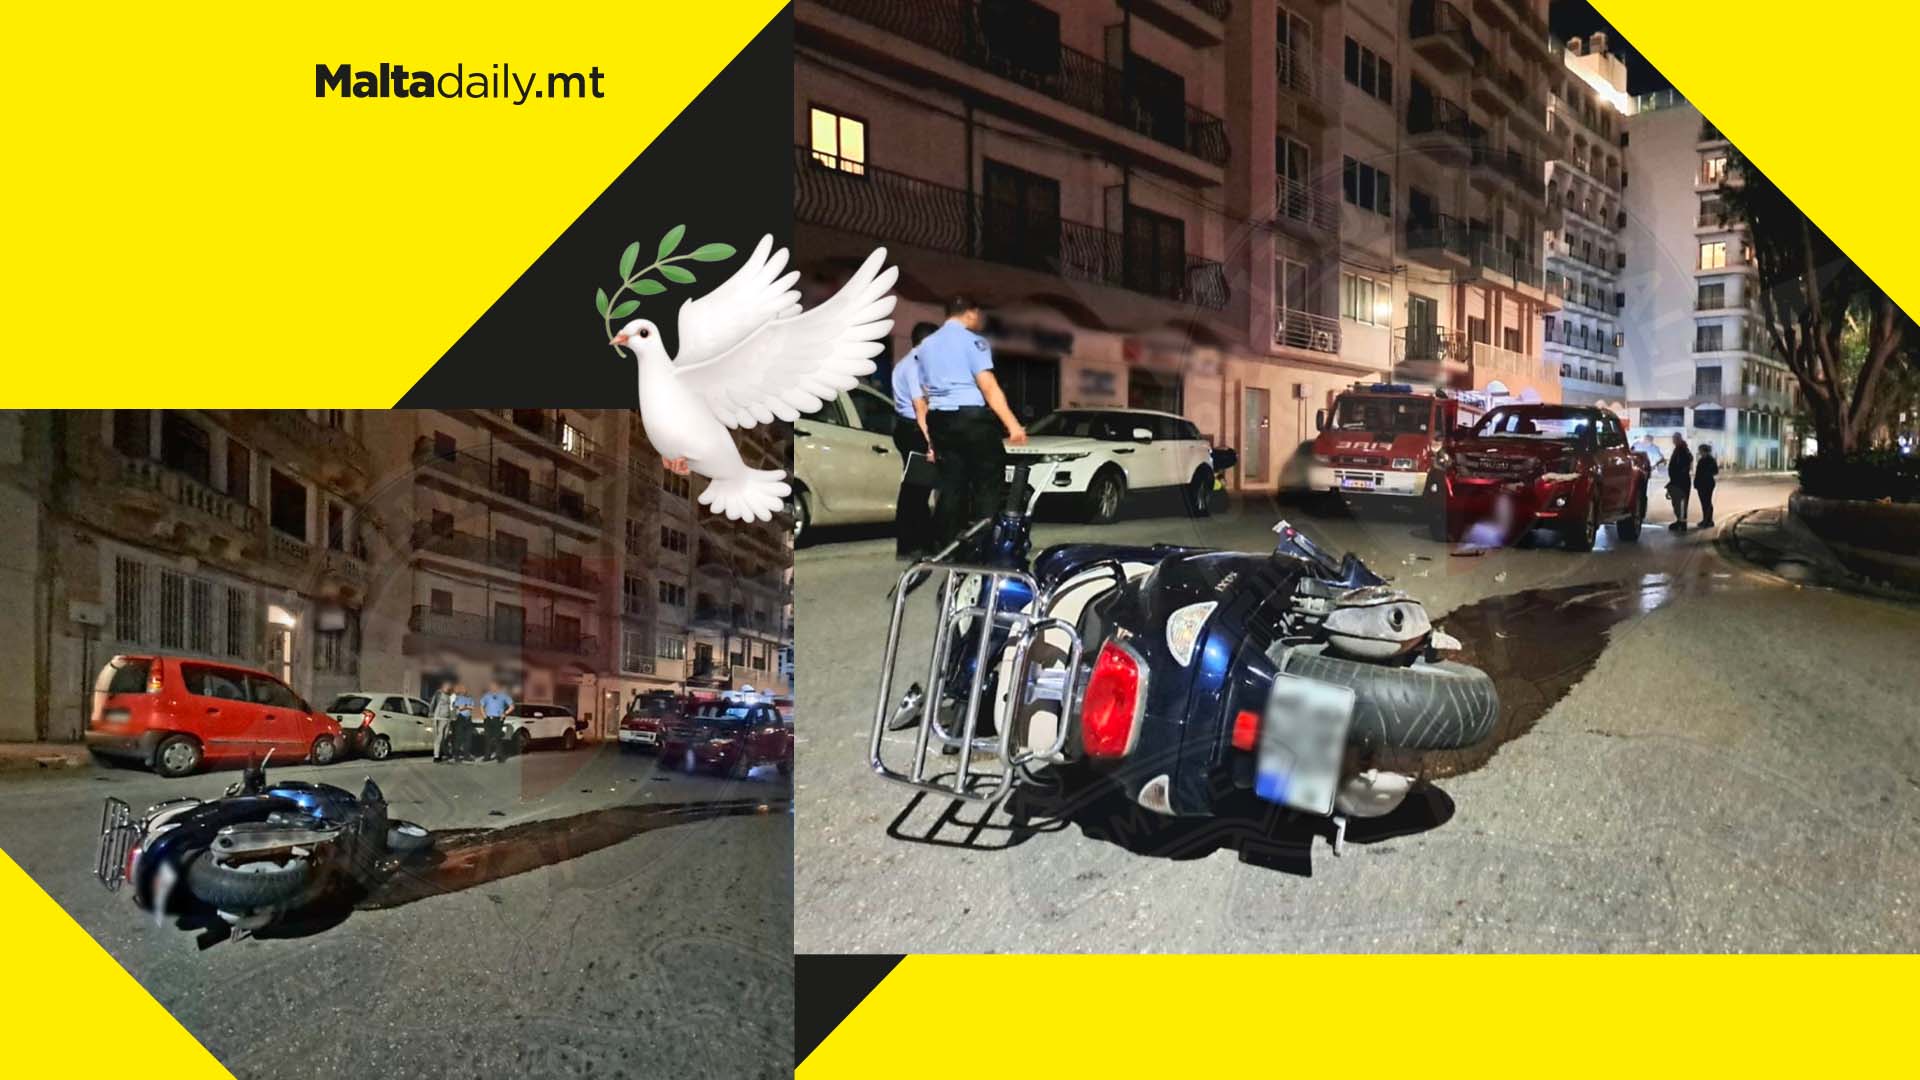 32 year old motorcyclist dies after Sliema road accident